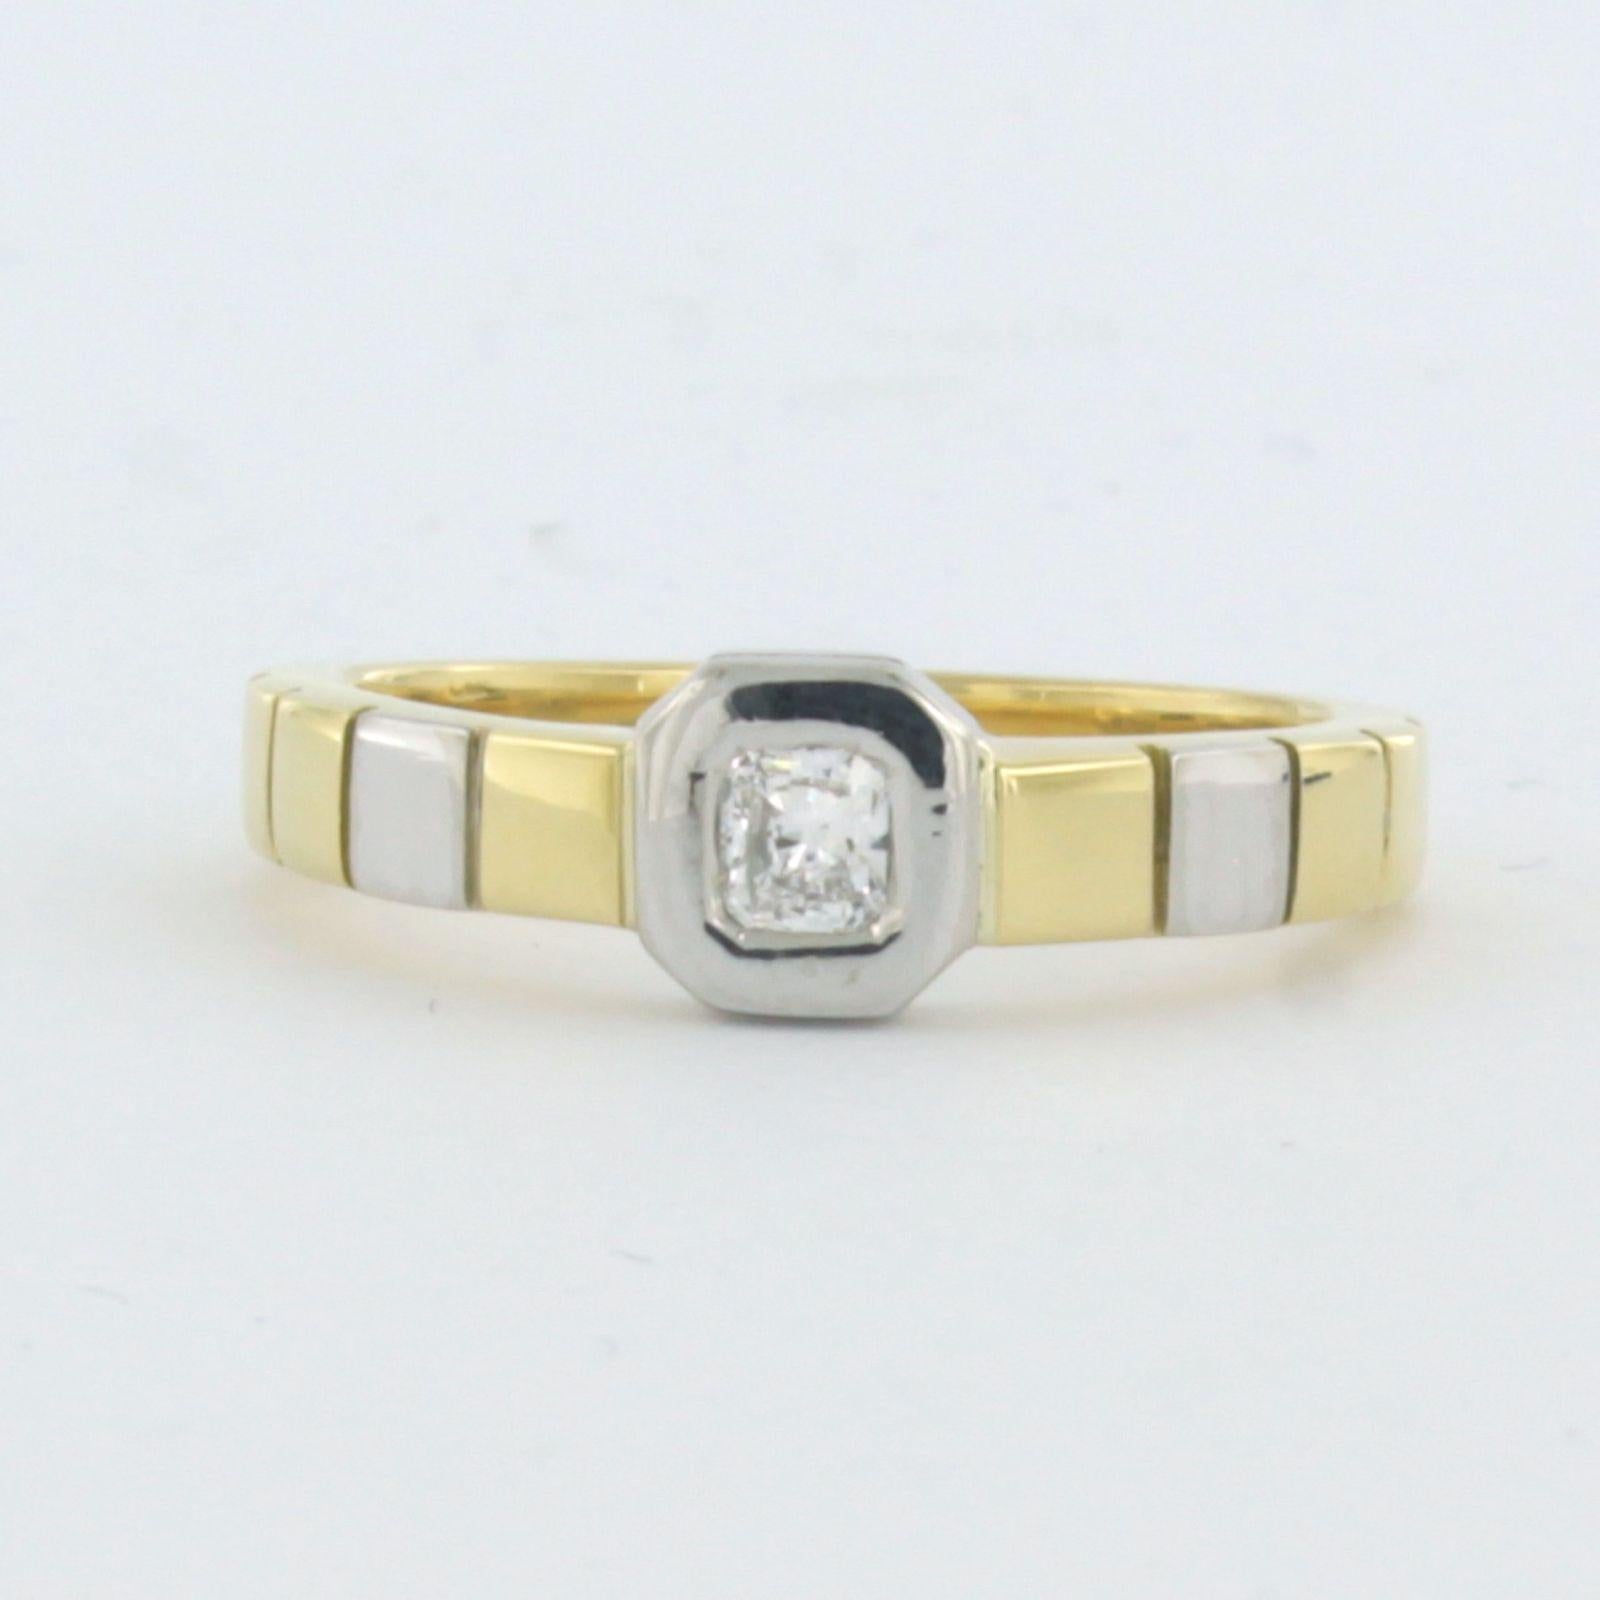 18k gold with platina ring set with emerald cut diamonds. 0.30ct - F/G - VS/SI - ring size 8.0 US / 18(57) EU

detailed description:

The top of the ring is 6.4 mm wide by 3.0 mm high

Ring size 8.0 US / 18(57) EU, the ring can be enlarged or